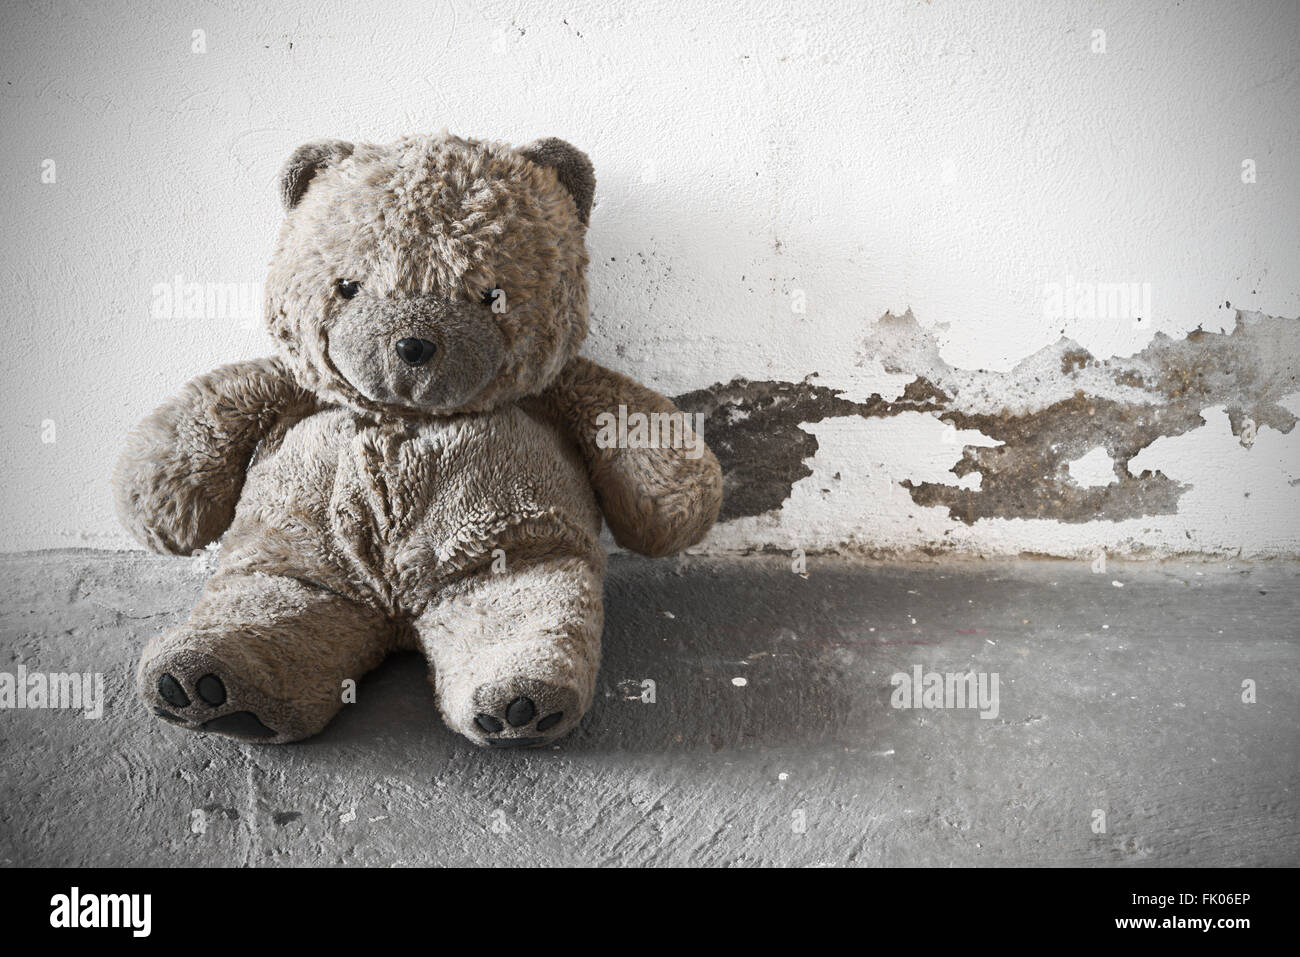 A old and dirty Teddy bear is sitting against a white concrete wall. vintage processing Stock Photo